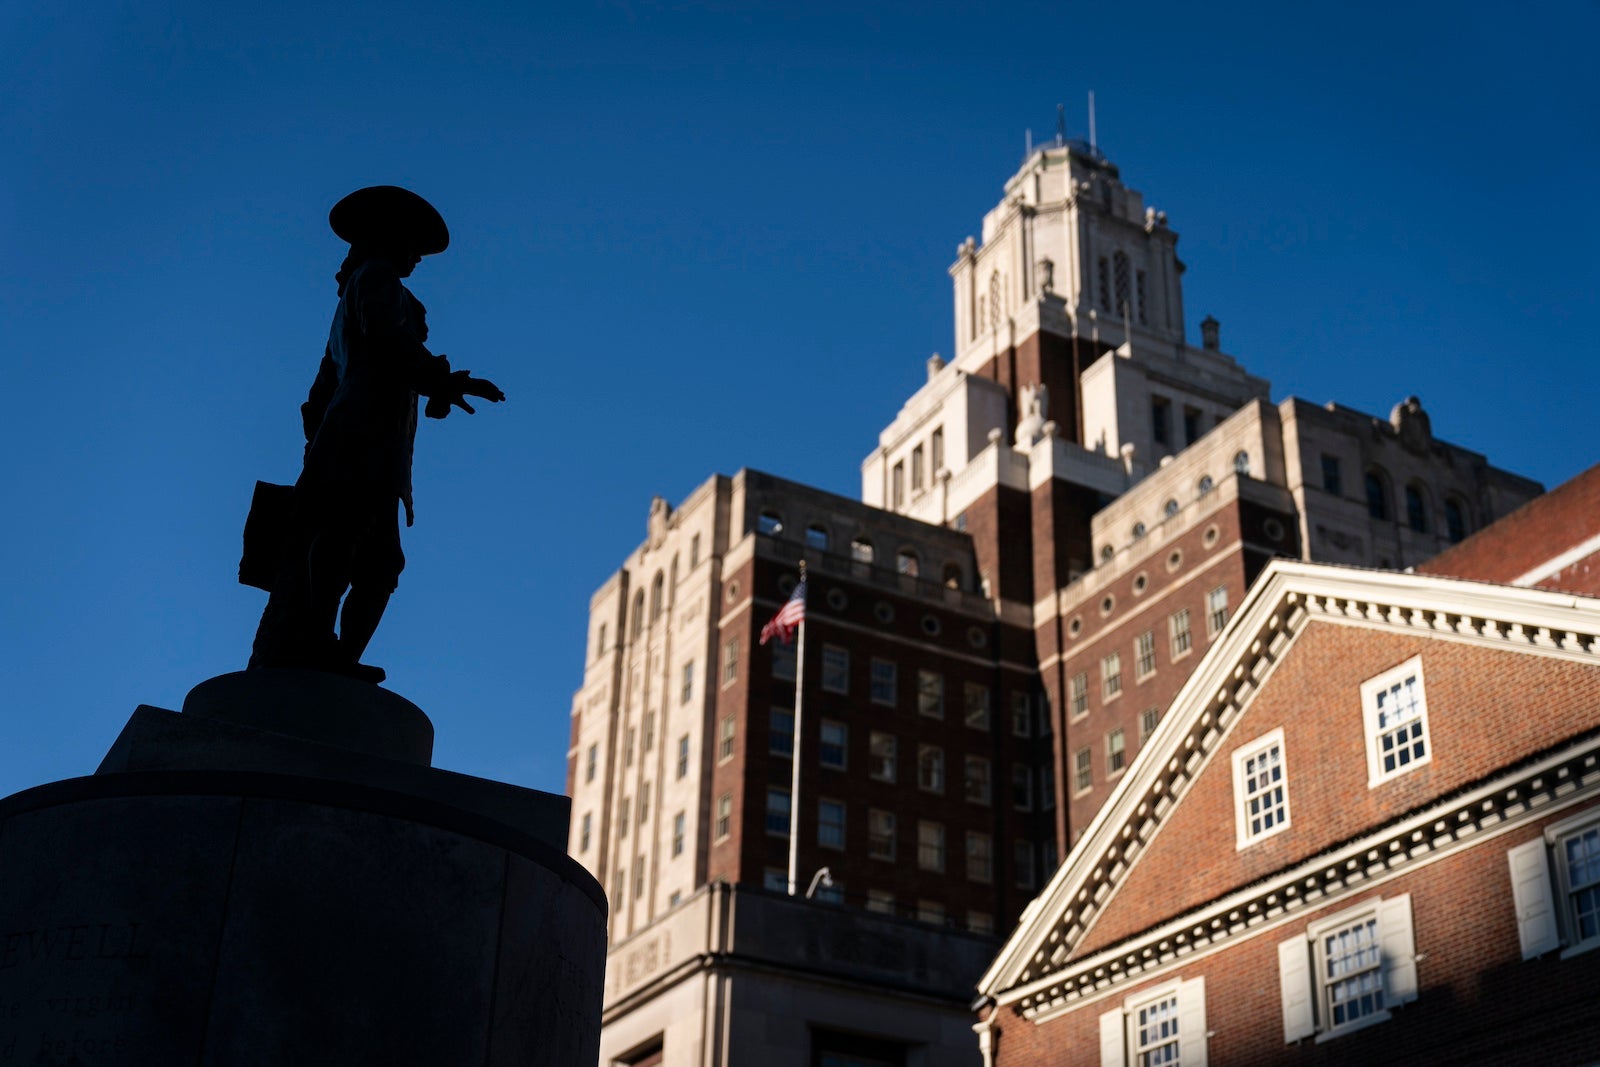 The tribes wanted to promote their history. Removing William Penn’s statue wasn’t a priority